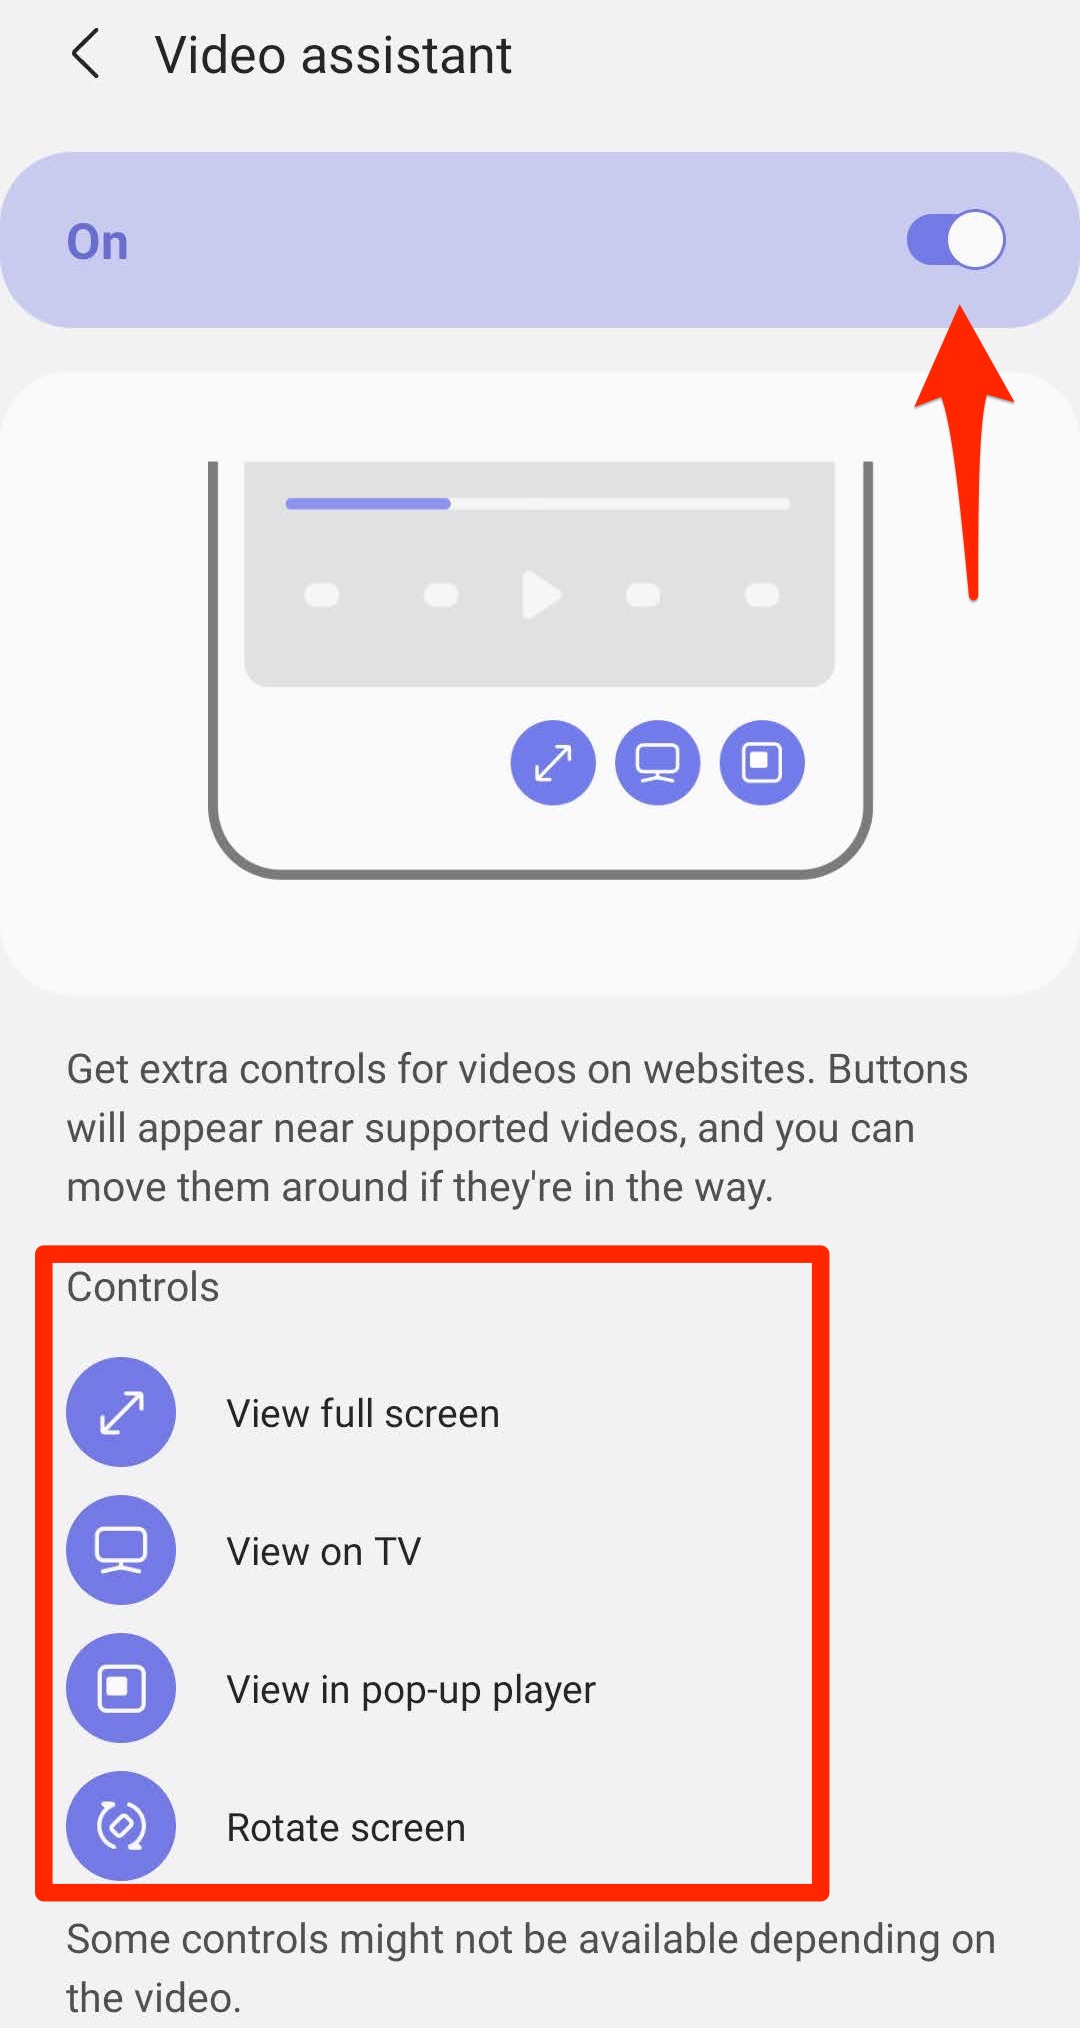 Enable Video assistant and controls on Samsung Internet